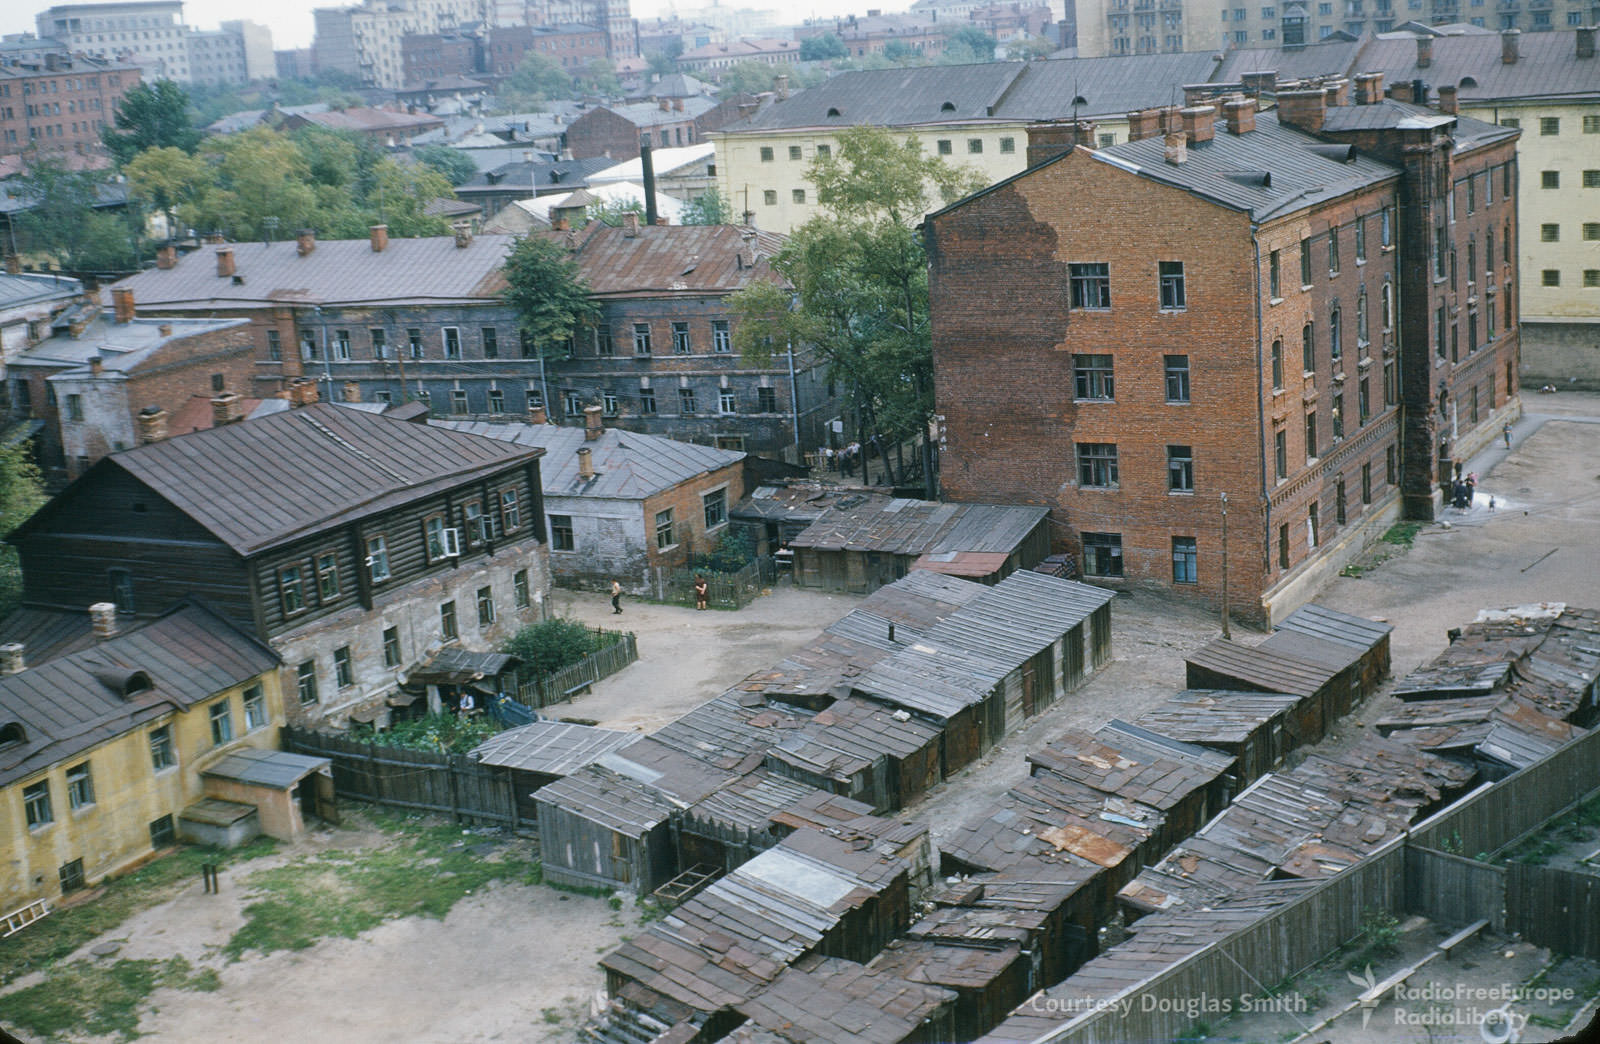 Log-topped housing and ramshackle sheds topped with corrugated steel in Moscow's Tagansky raion.